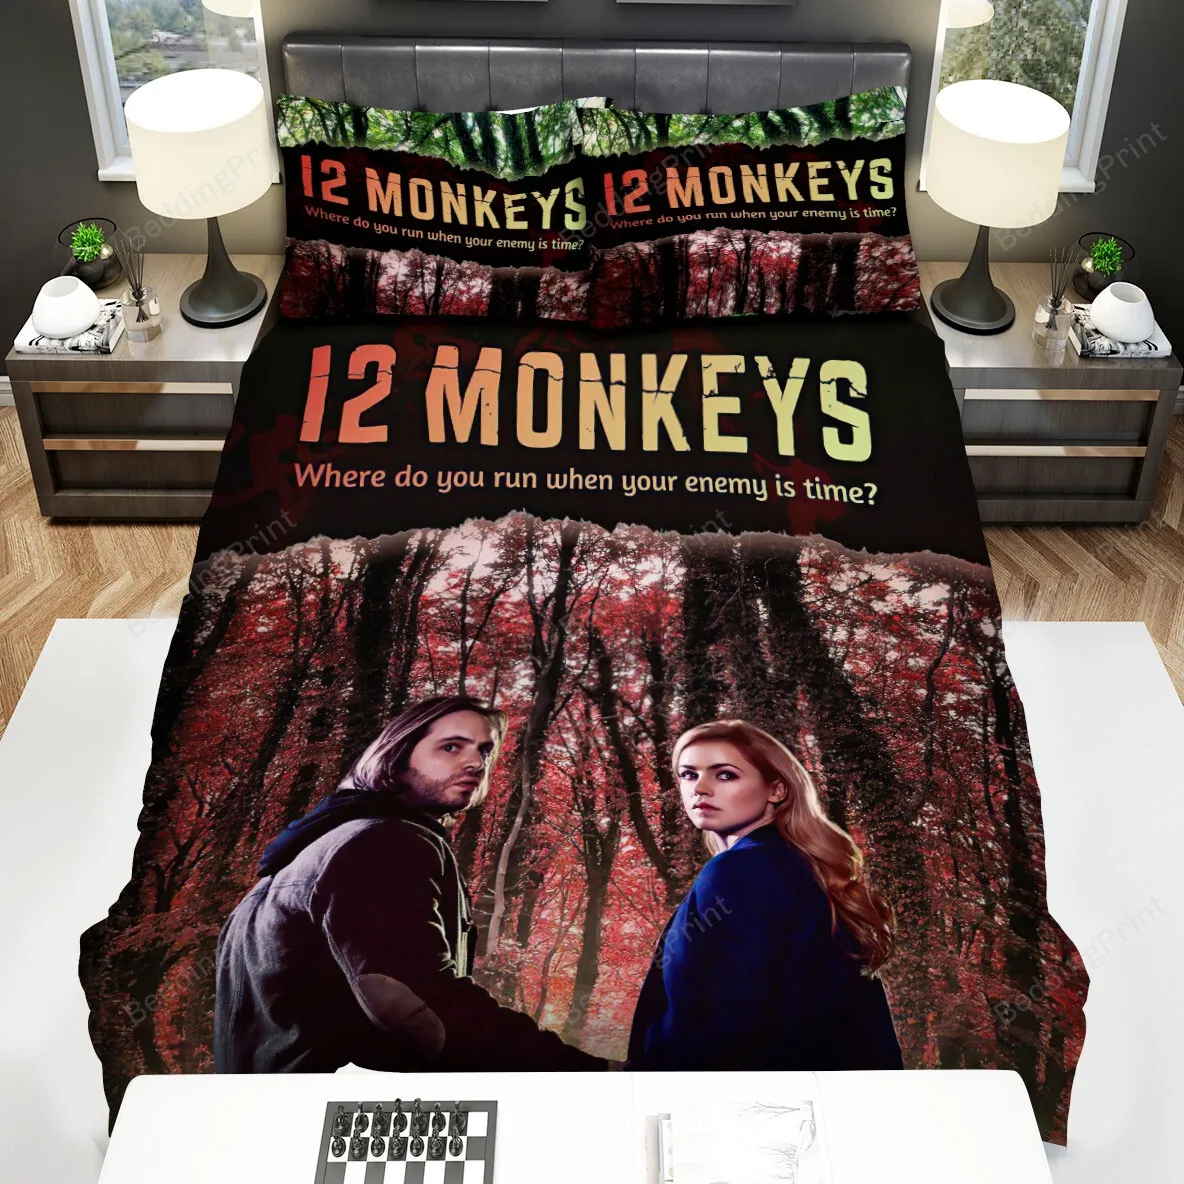 12 Monkeys (20152018) Where Do You Run When Your Enemy Is Time Movie Poster Bed Sheets Spread Comforter Duvet Cover Bedding Sets